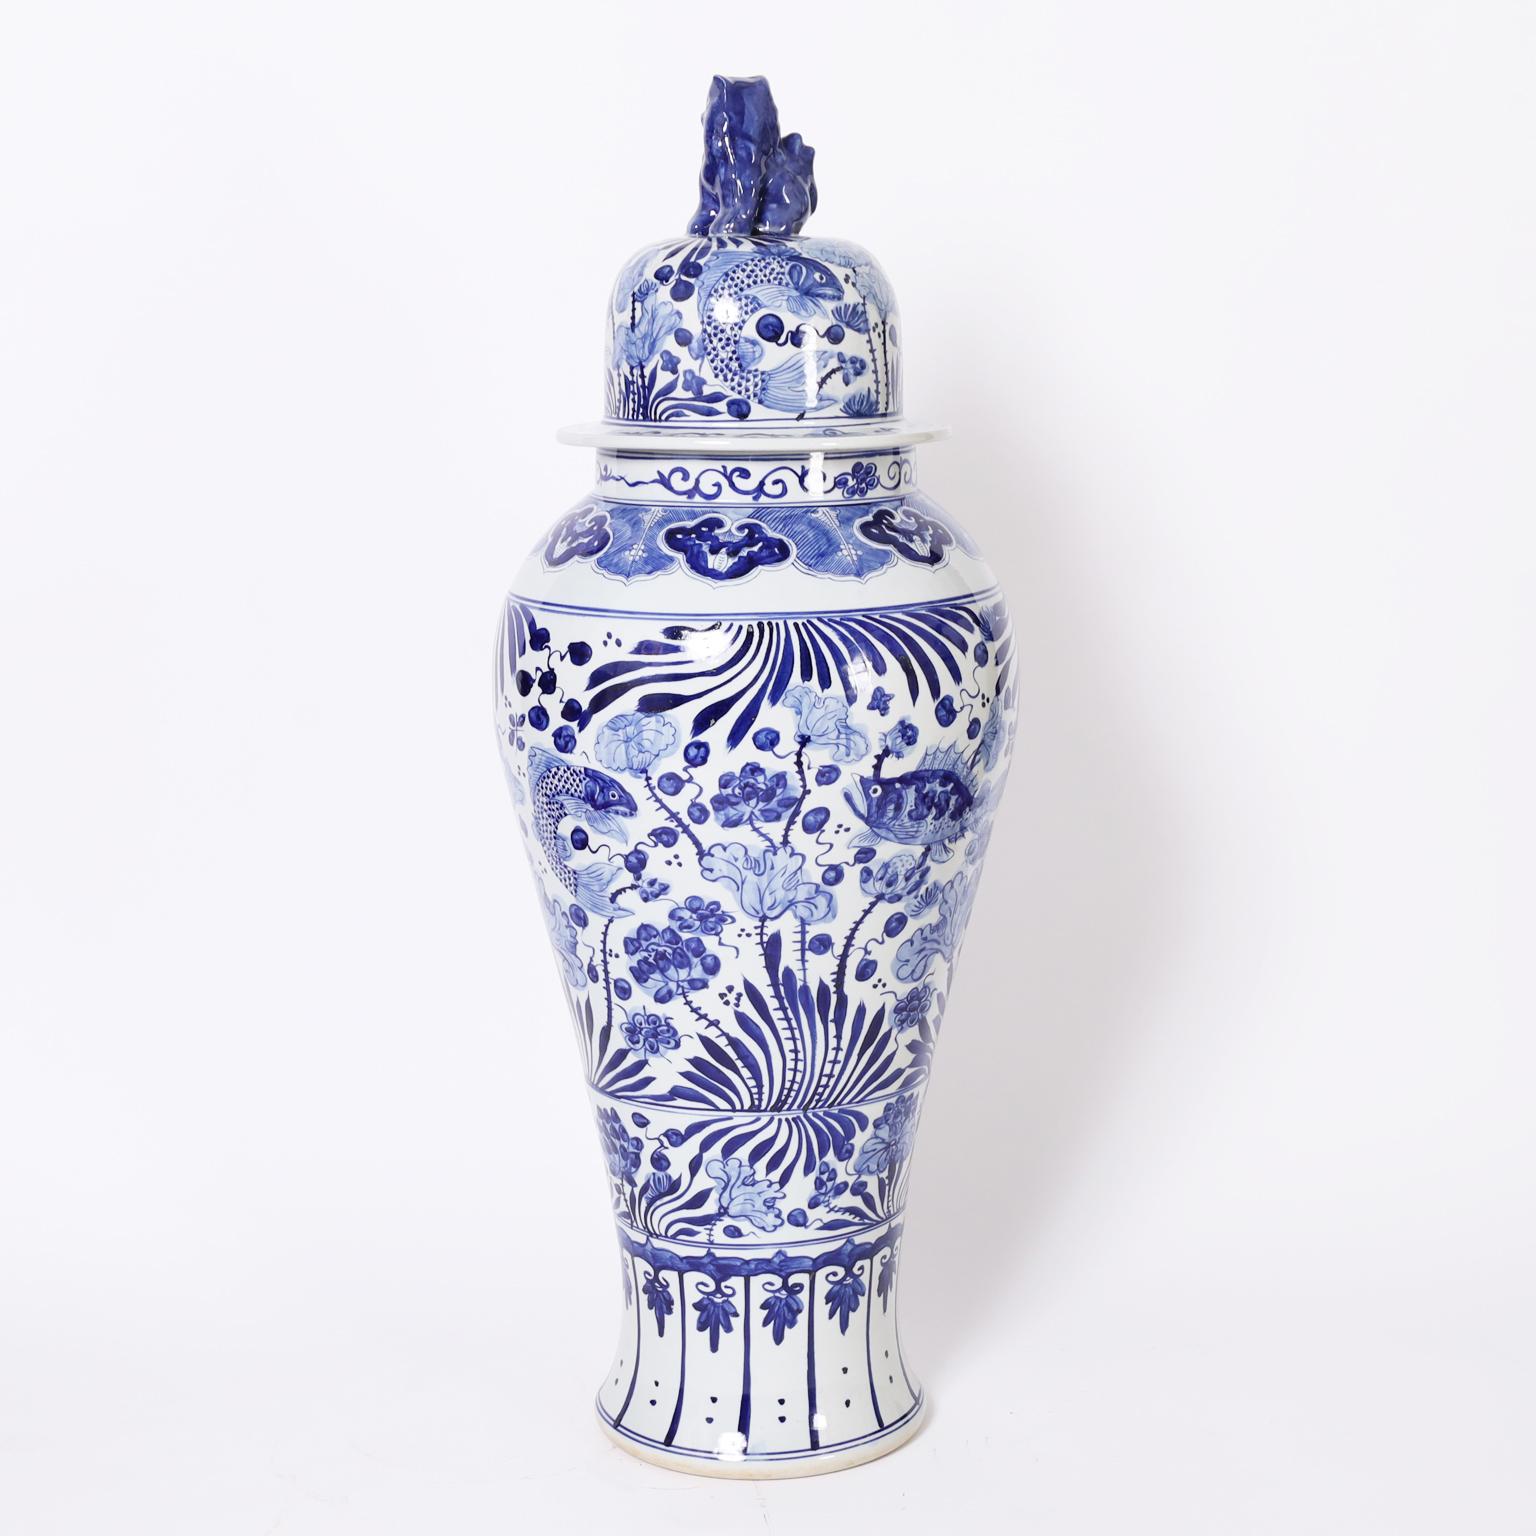 Contemporary Chinese Export Pair of Chinese Blue and White Porcelain Palace Urns For Sale